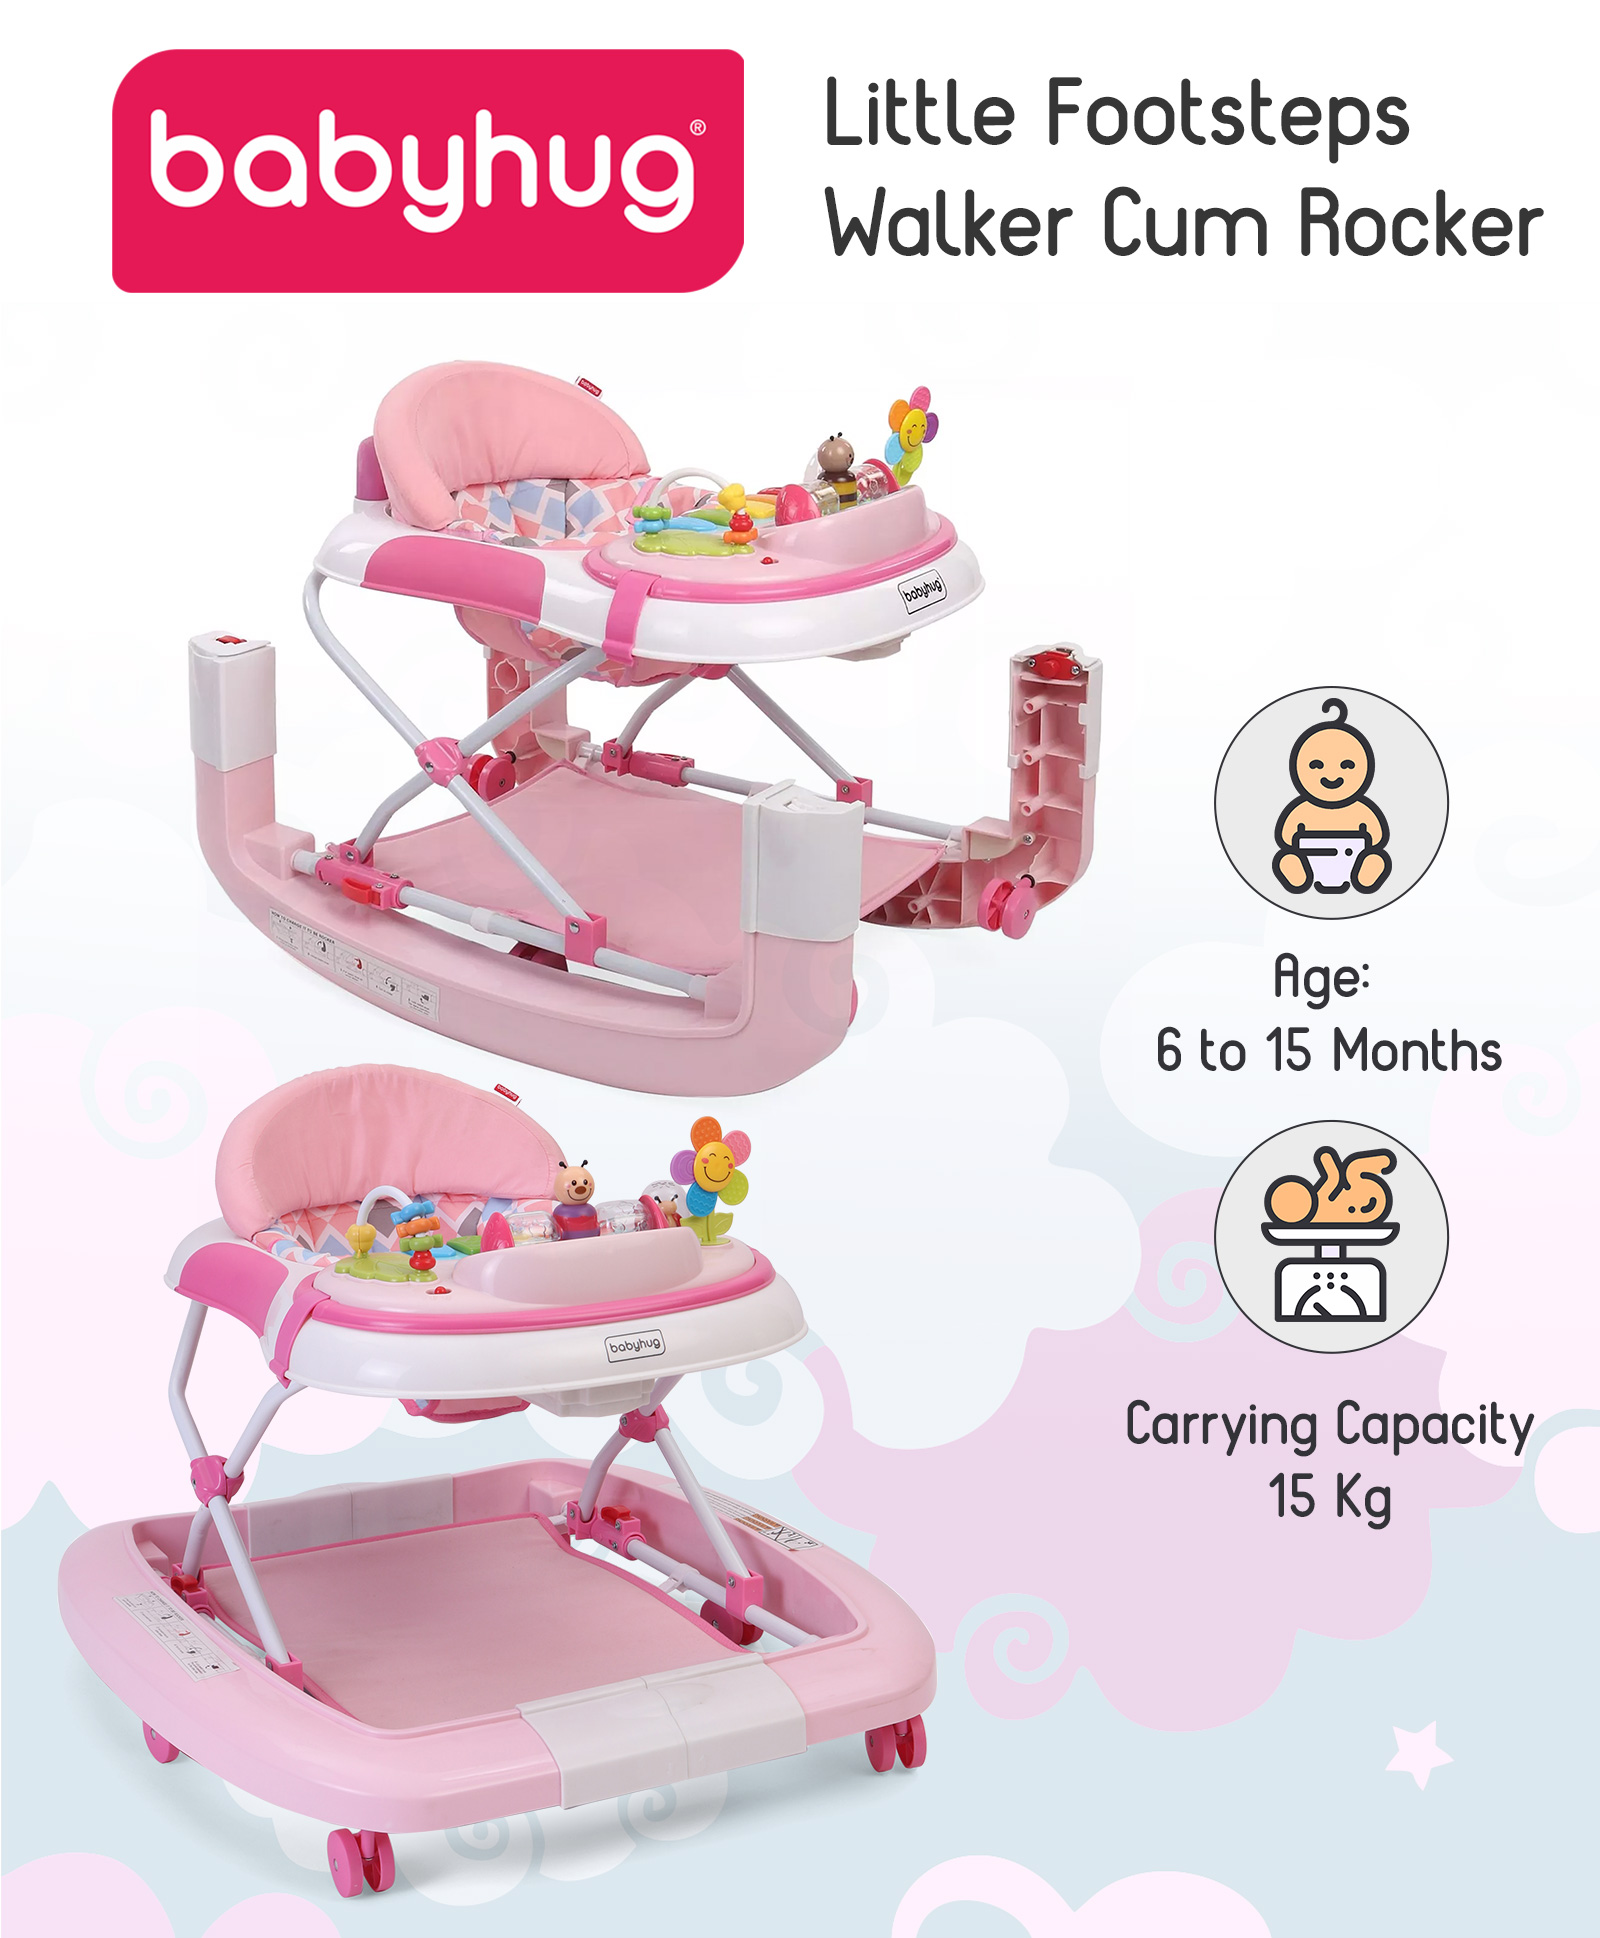 bouncy seat fisher price